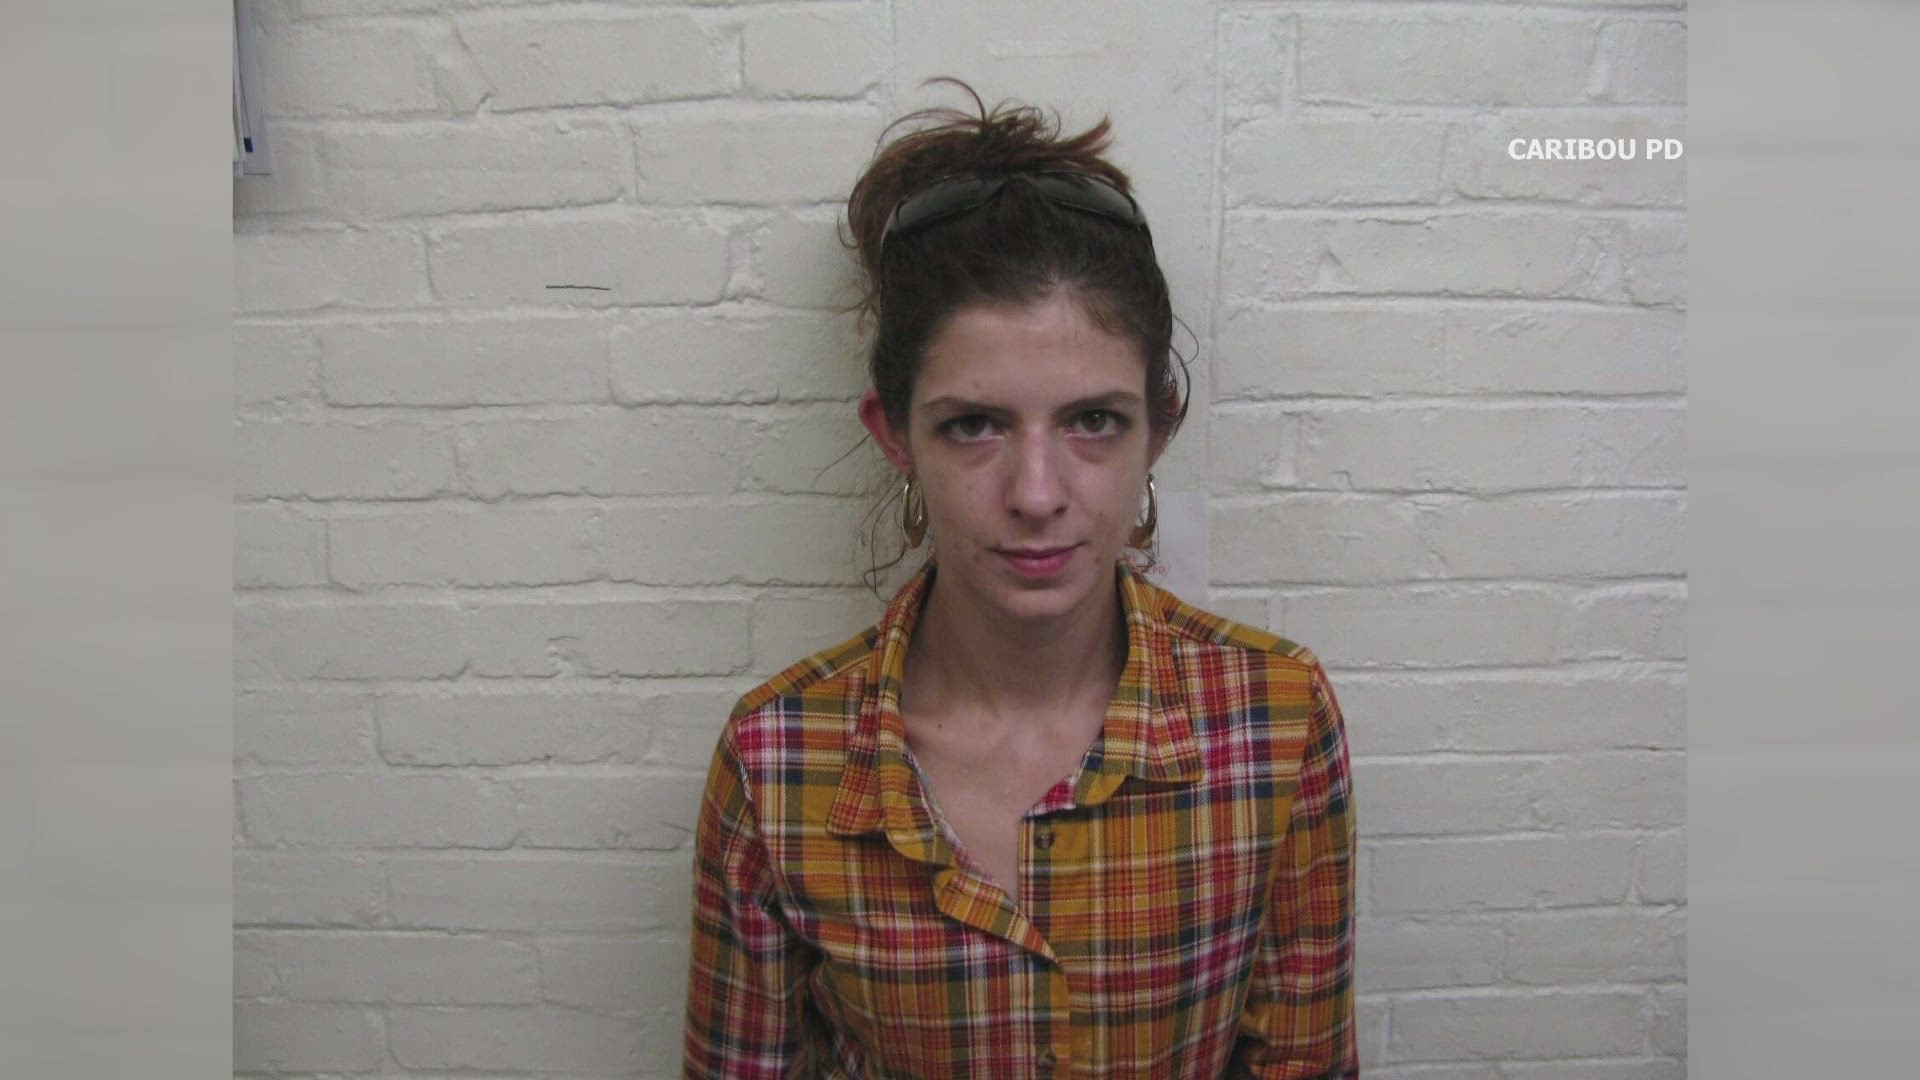 Ashley Rasmussen is accused of having Meth and Fentanyl in her car. She was originally stopped for a traffic violation and then a police dog sniffed out the drugs.